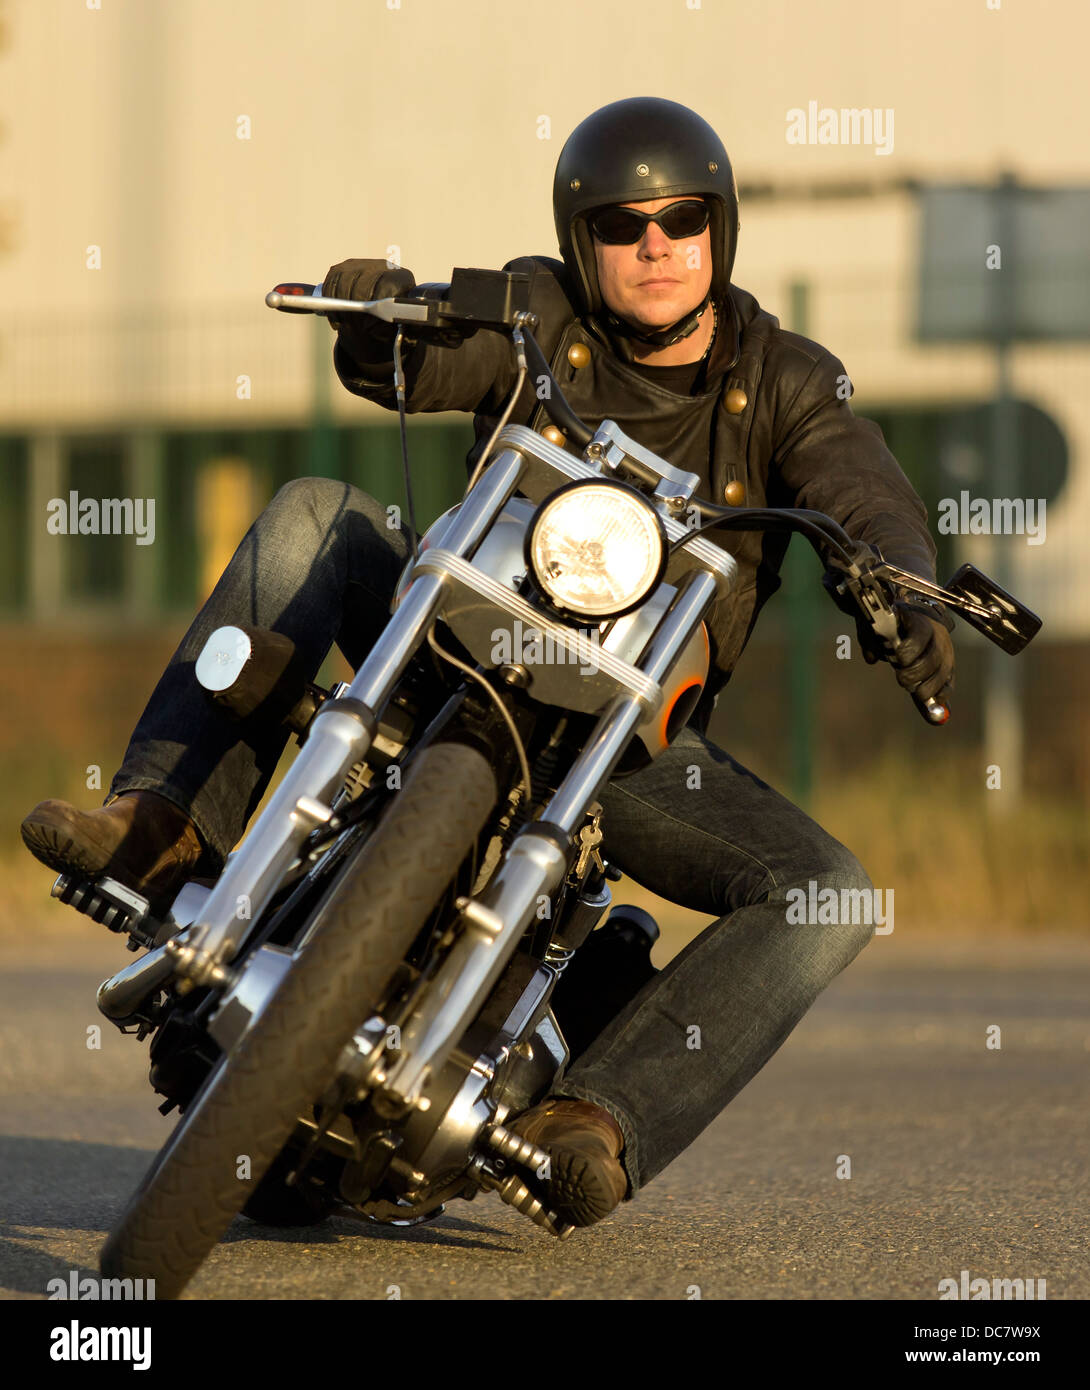 Young man wearing leather clothes with his Harley Davidson Stock Photo